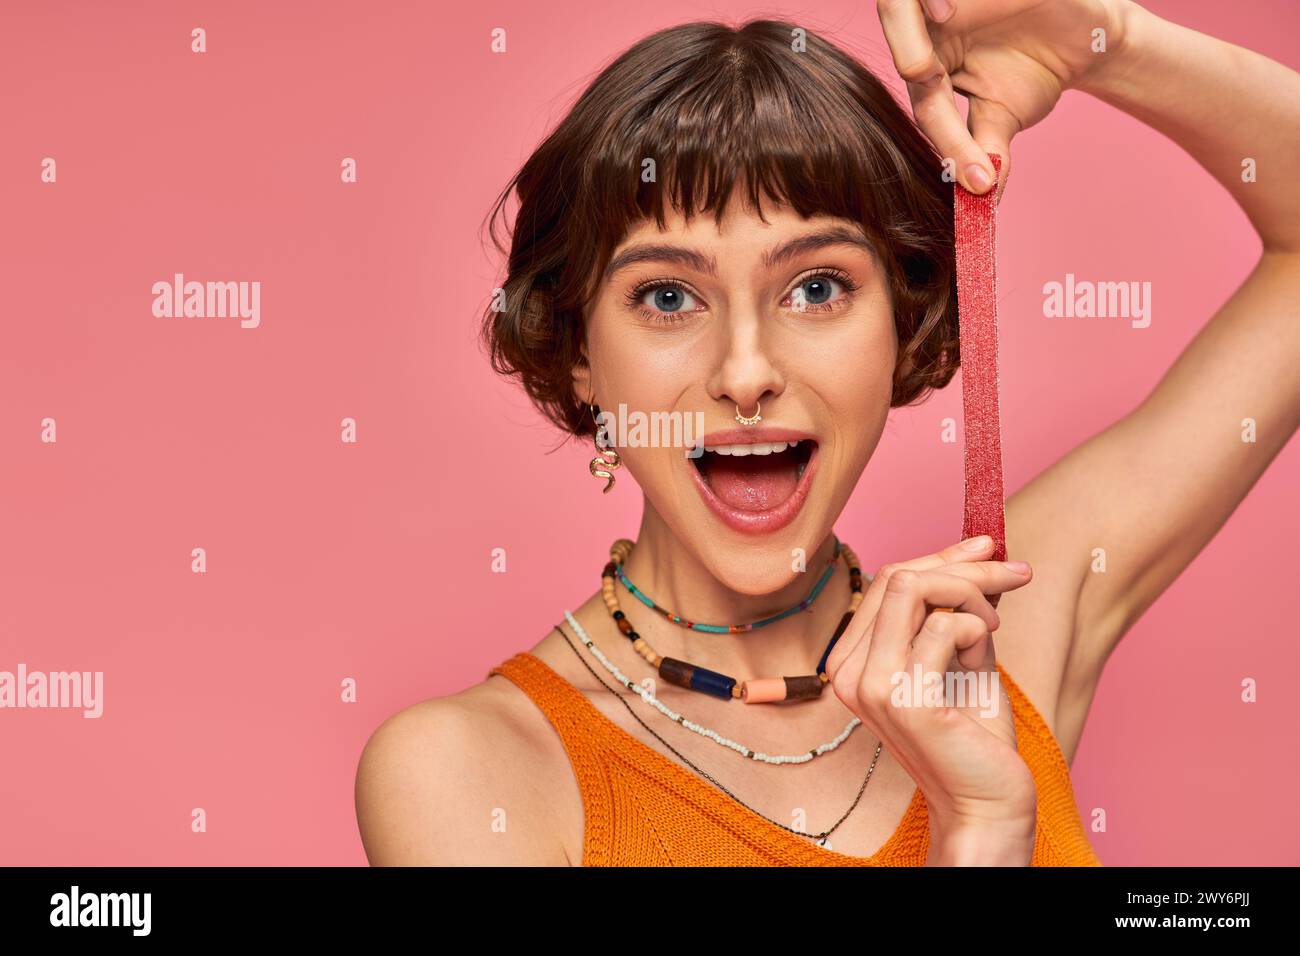 excited and young woman with nose piercing holding sweet and sour candy strip on pink background Stock Photo